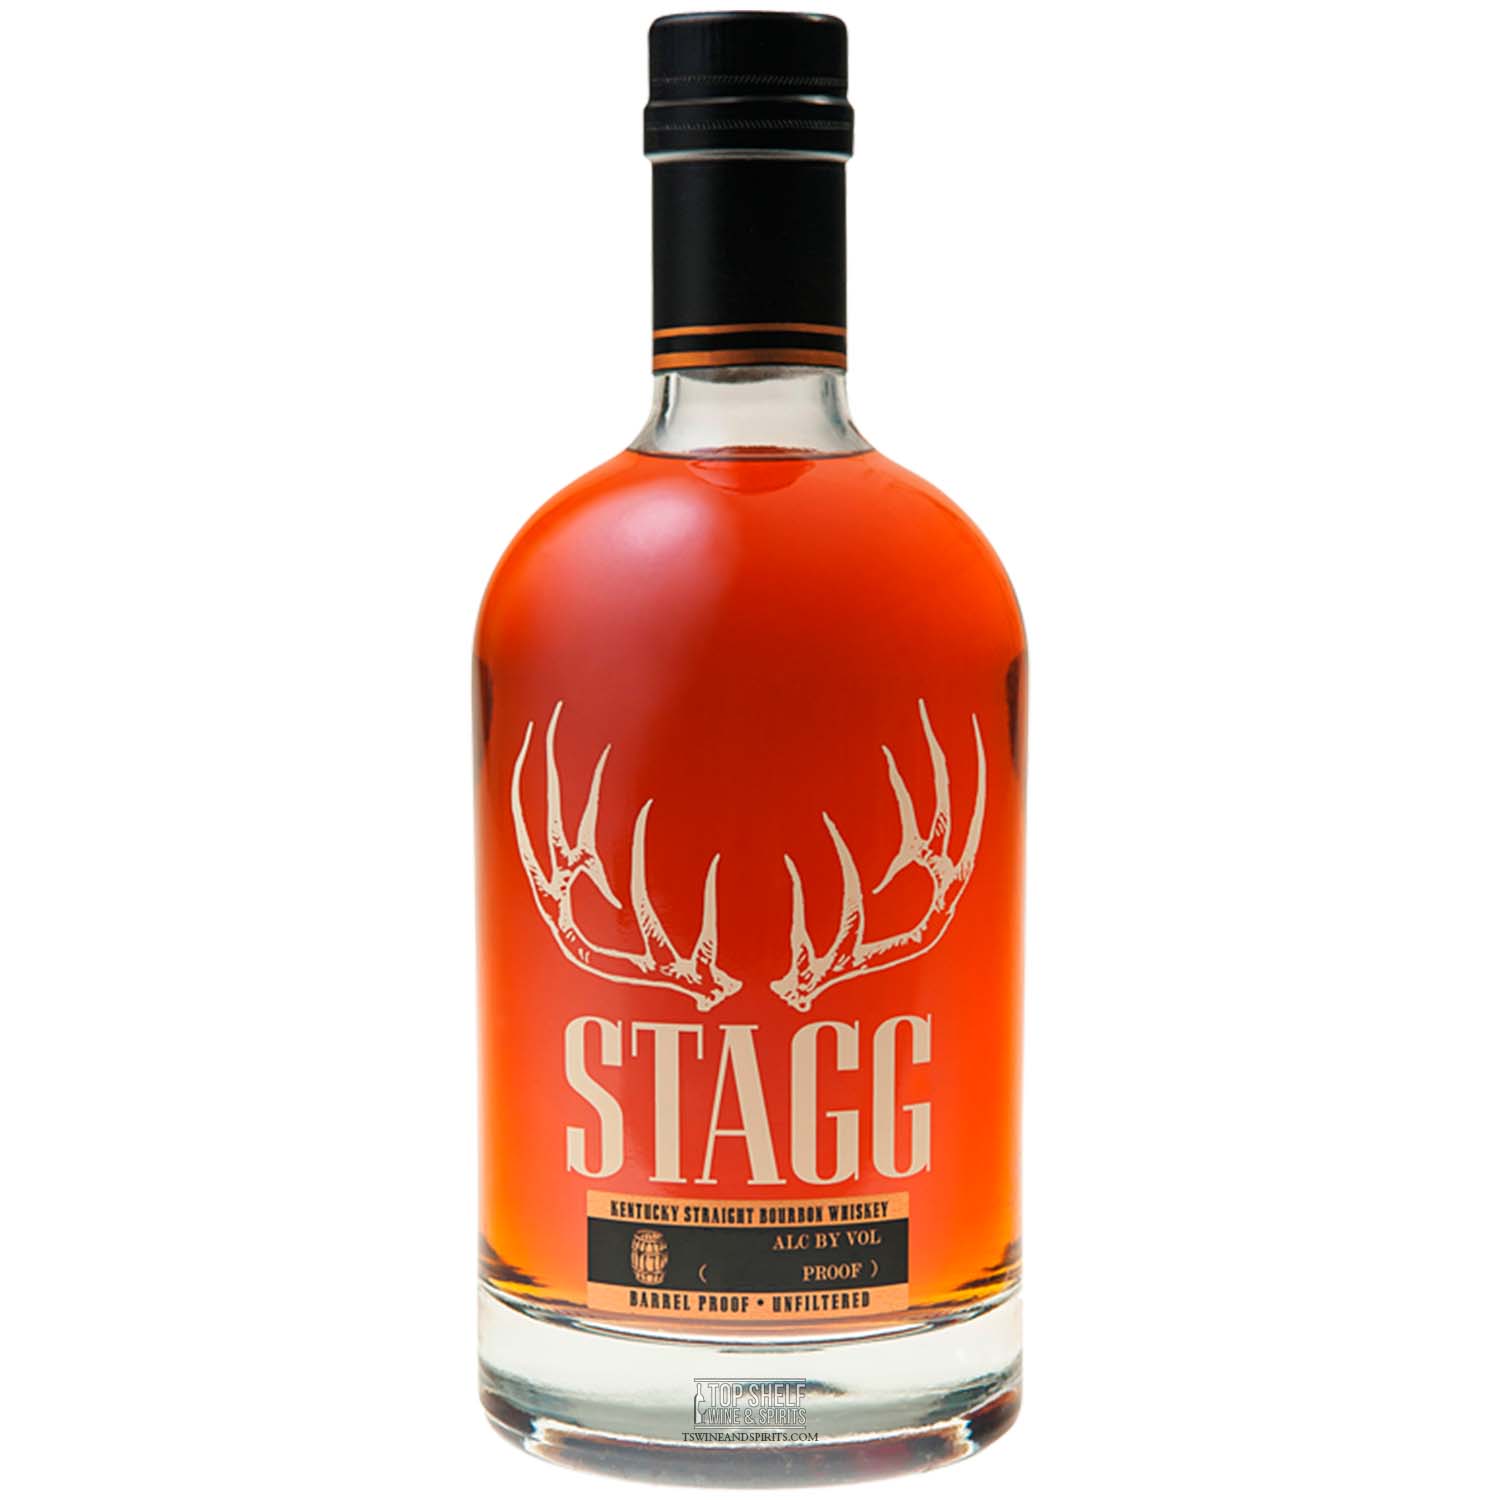 Stagg Unfiltered Straight Bourbon 125.9 Proof